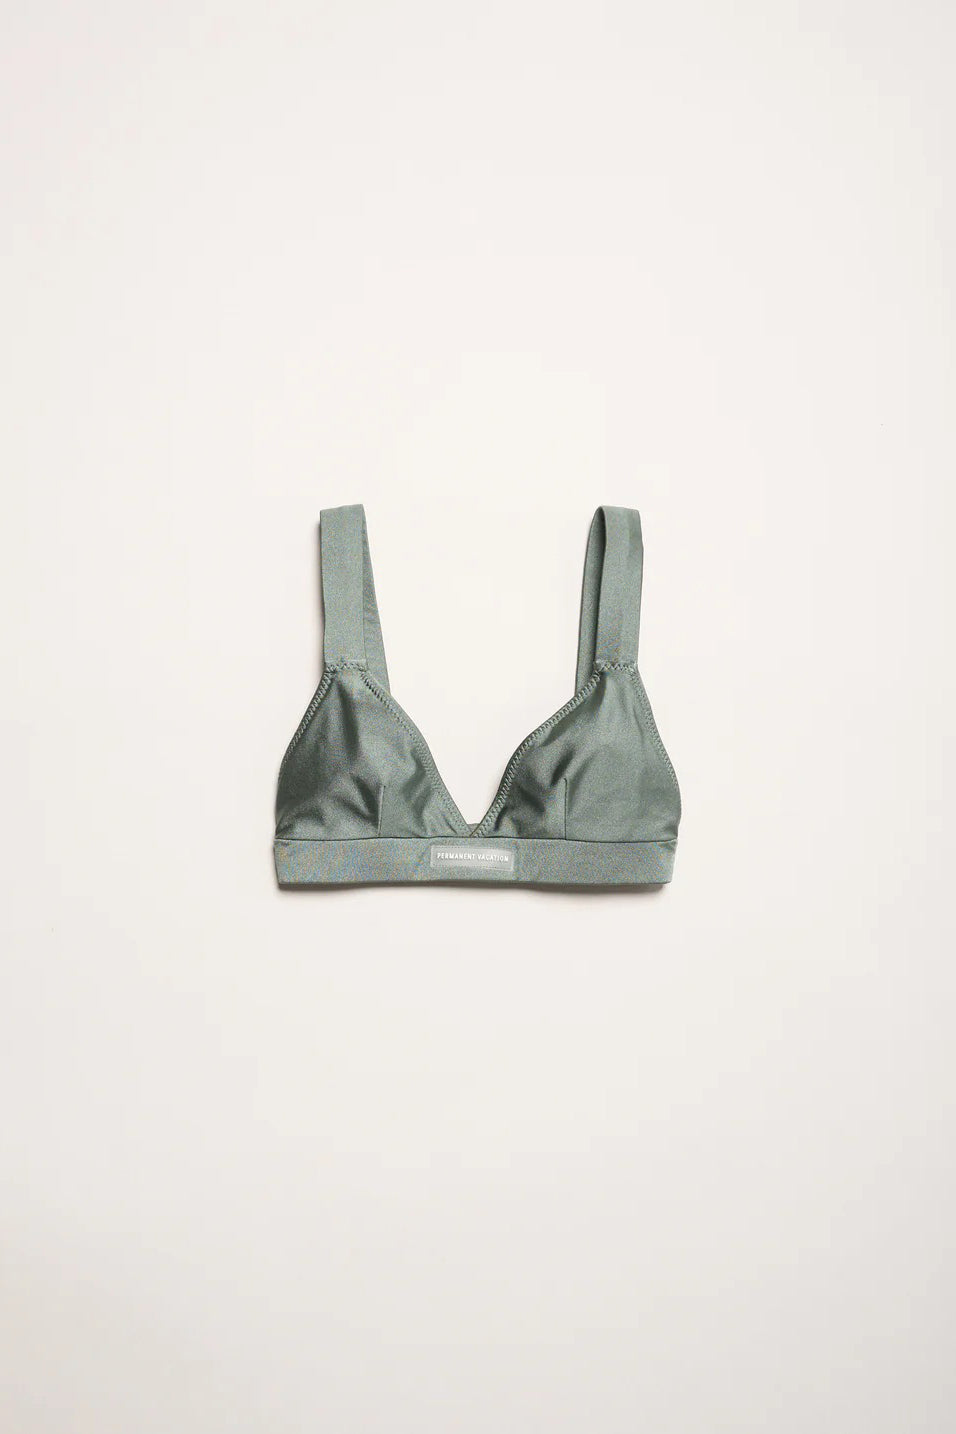 PV Immerse Crop Top // Mystic Green